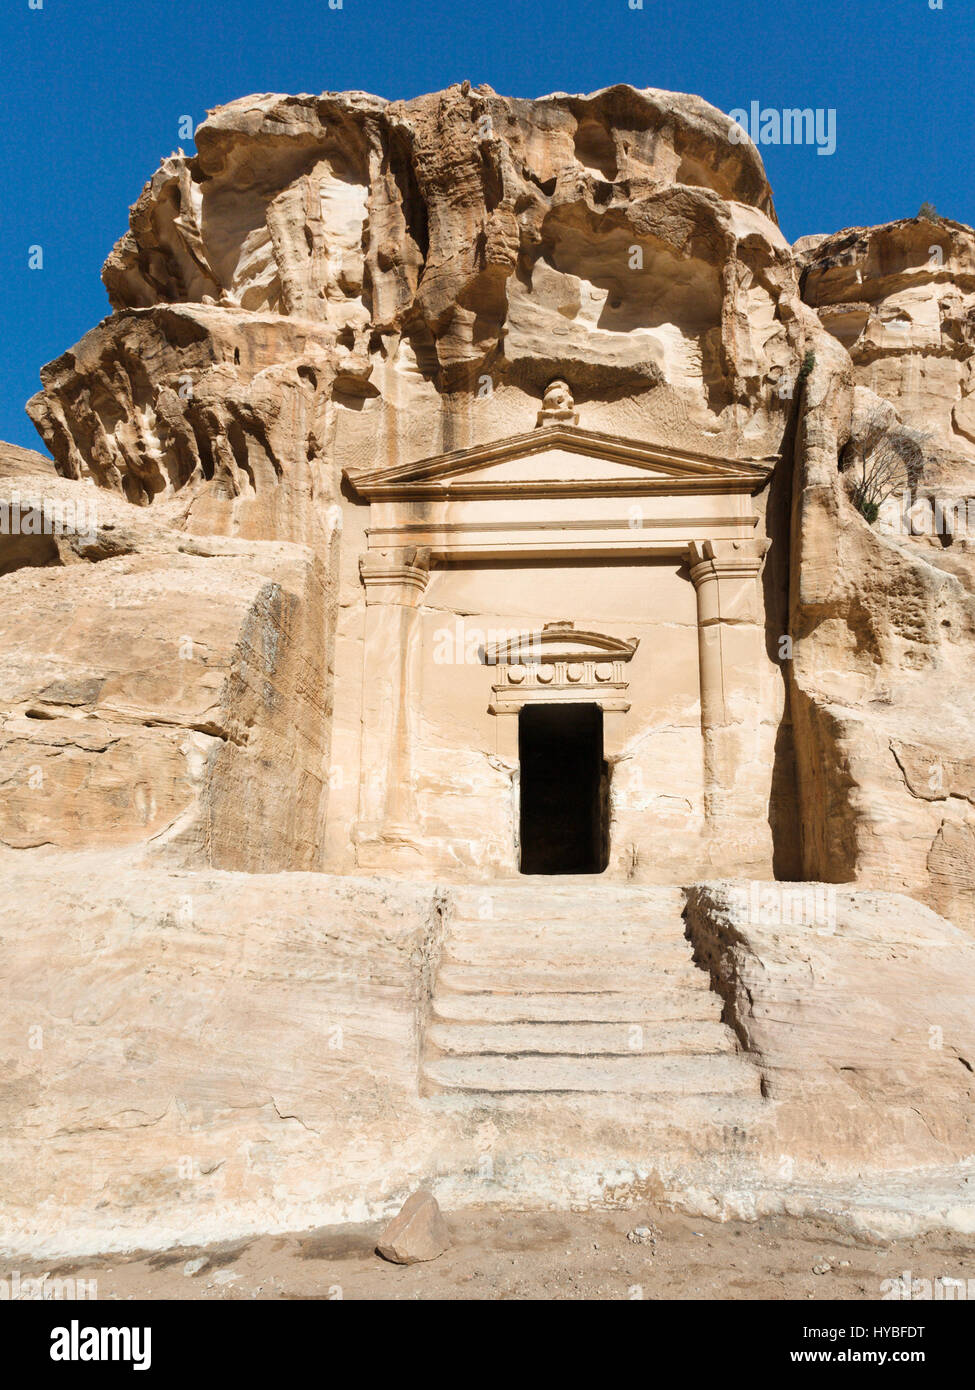 Travel to Middle East country Kingdom of Jordan - ancient tomb in Little Petra town (Siq al-Barid station) in winter Stock Photo